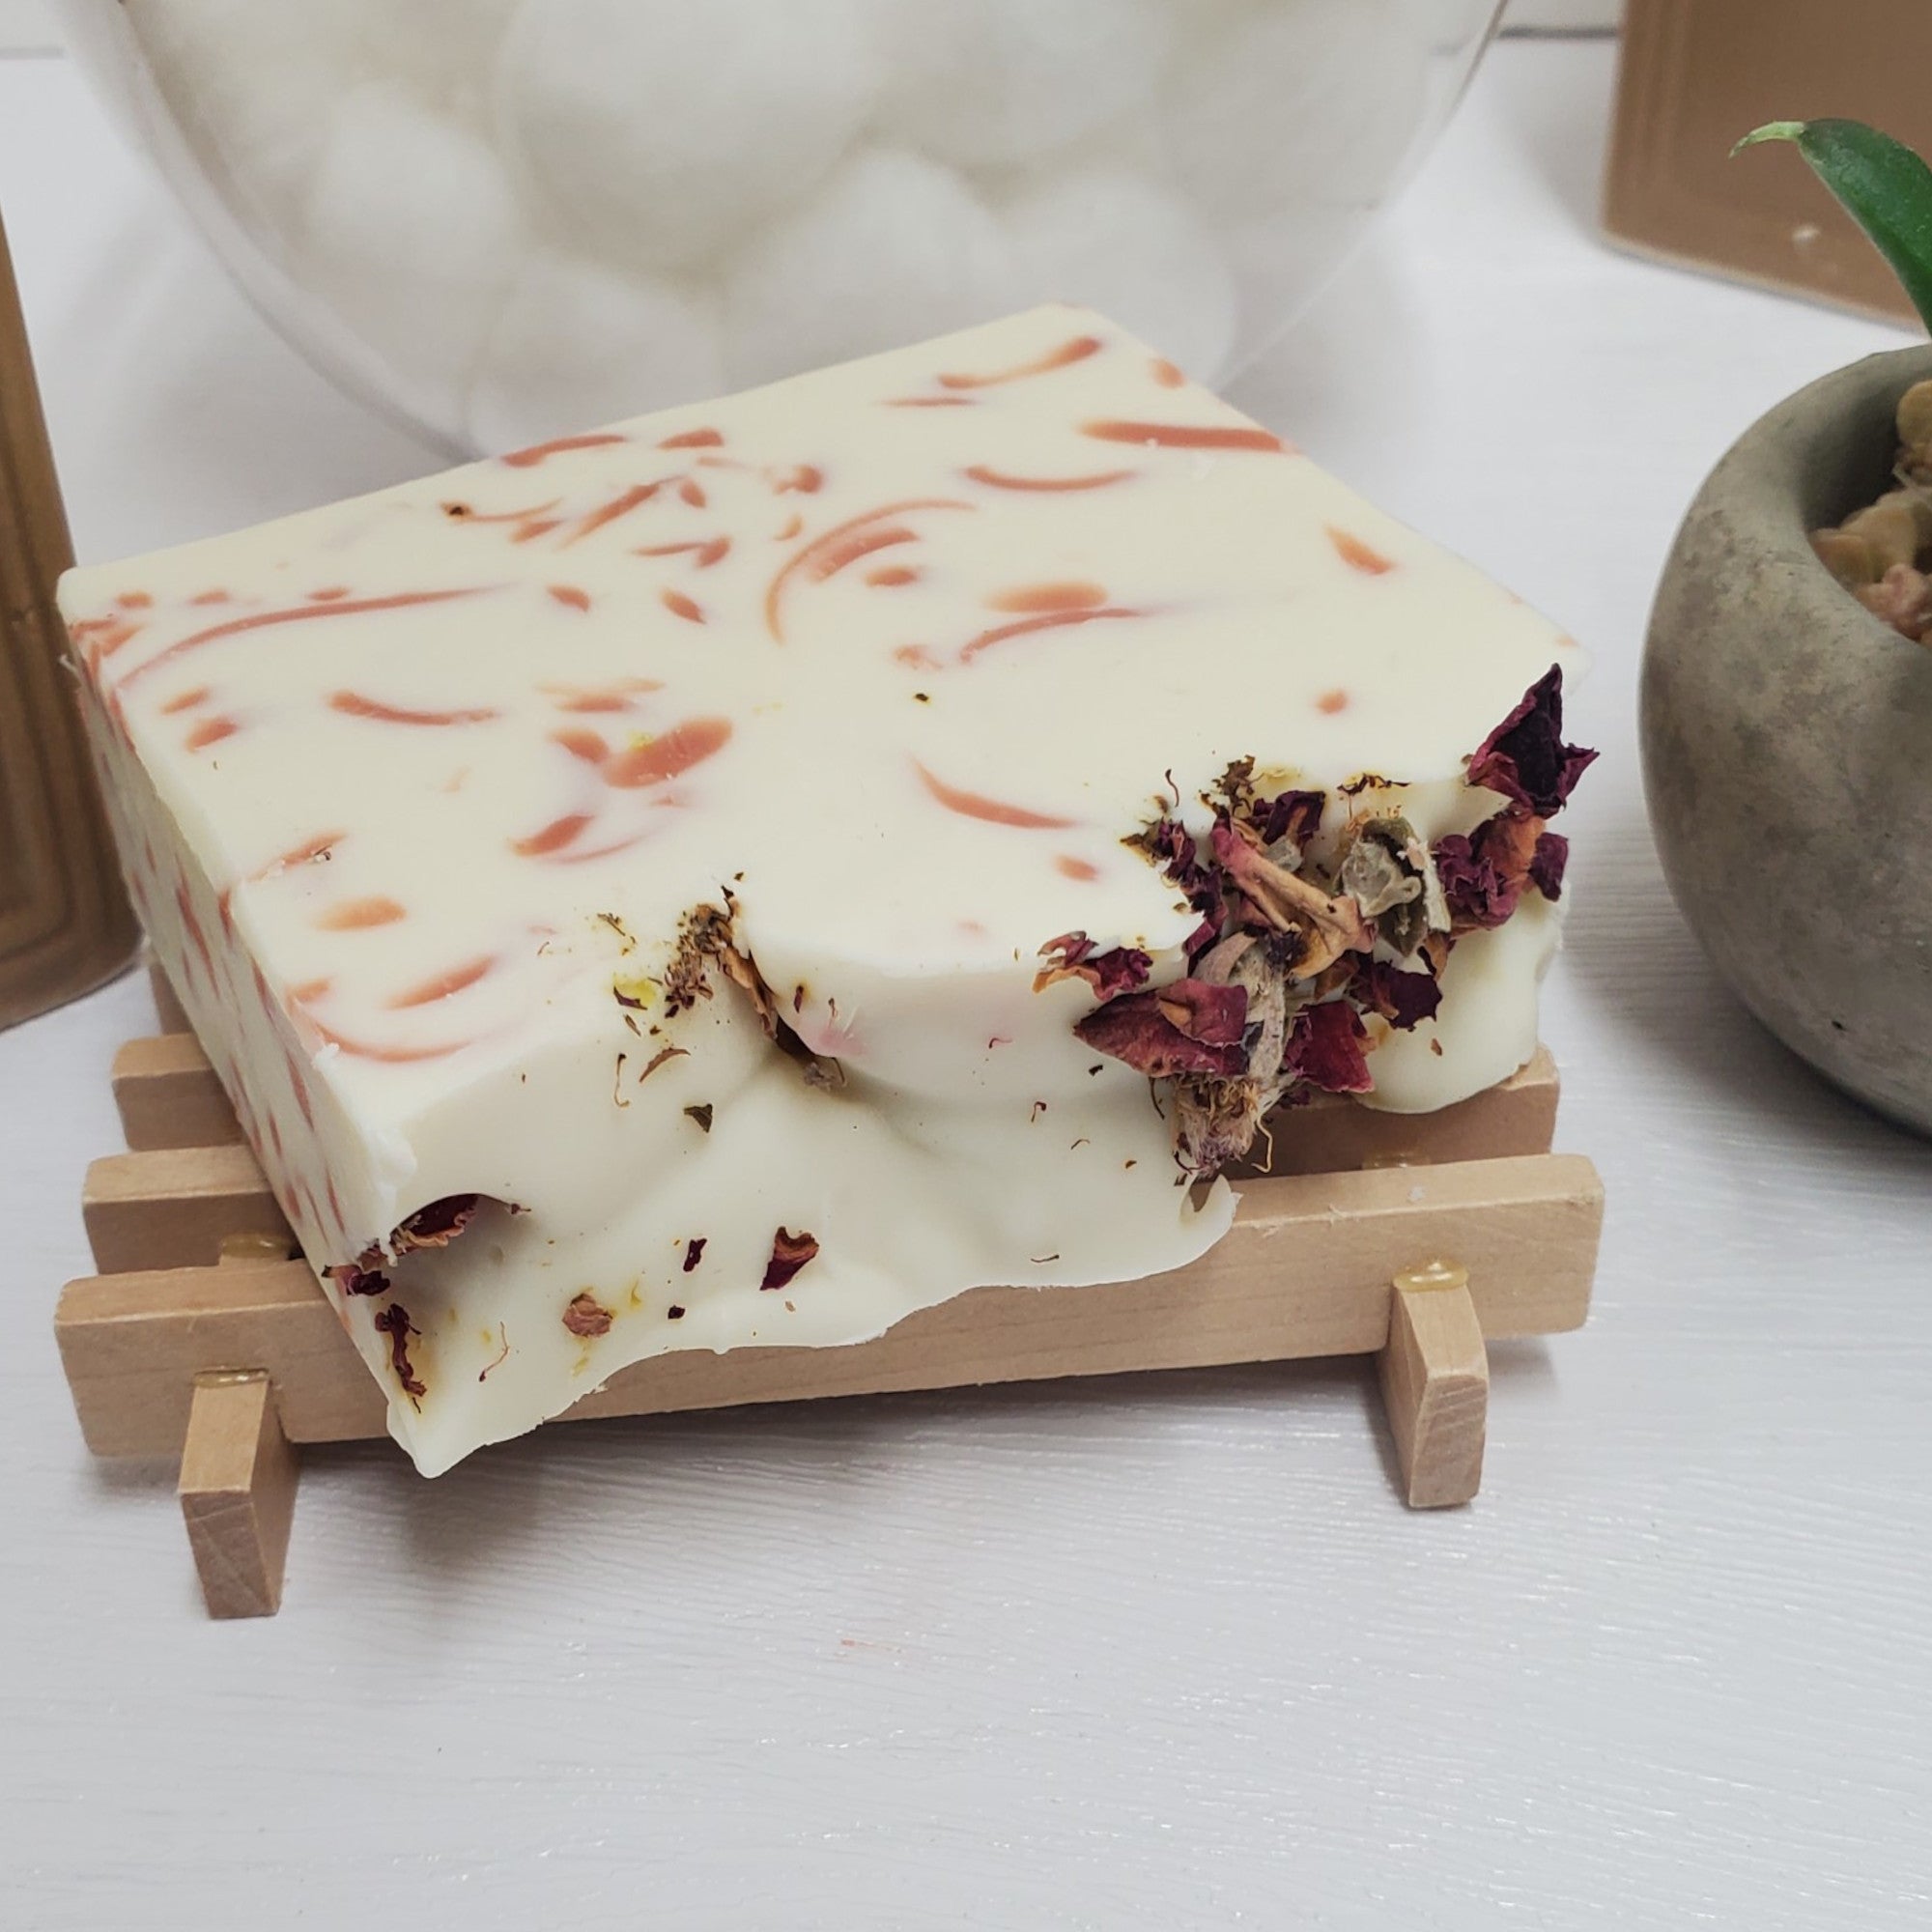 Blooming Rose handmade soap on wood soap dish angle view